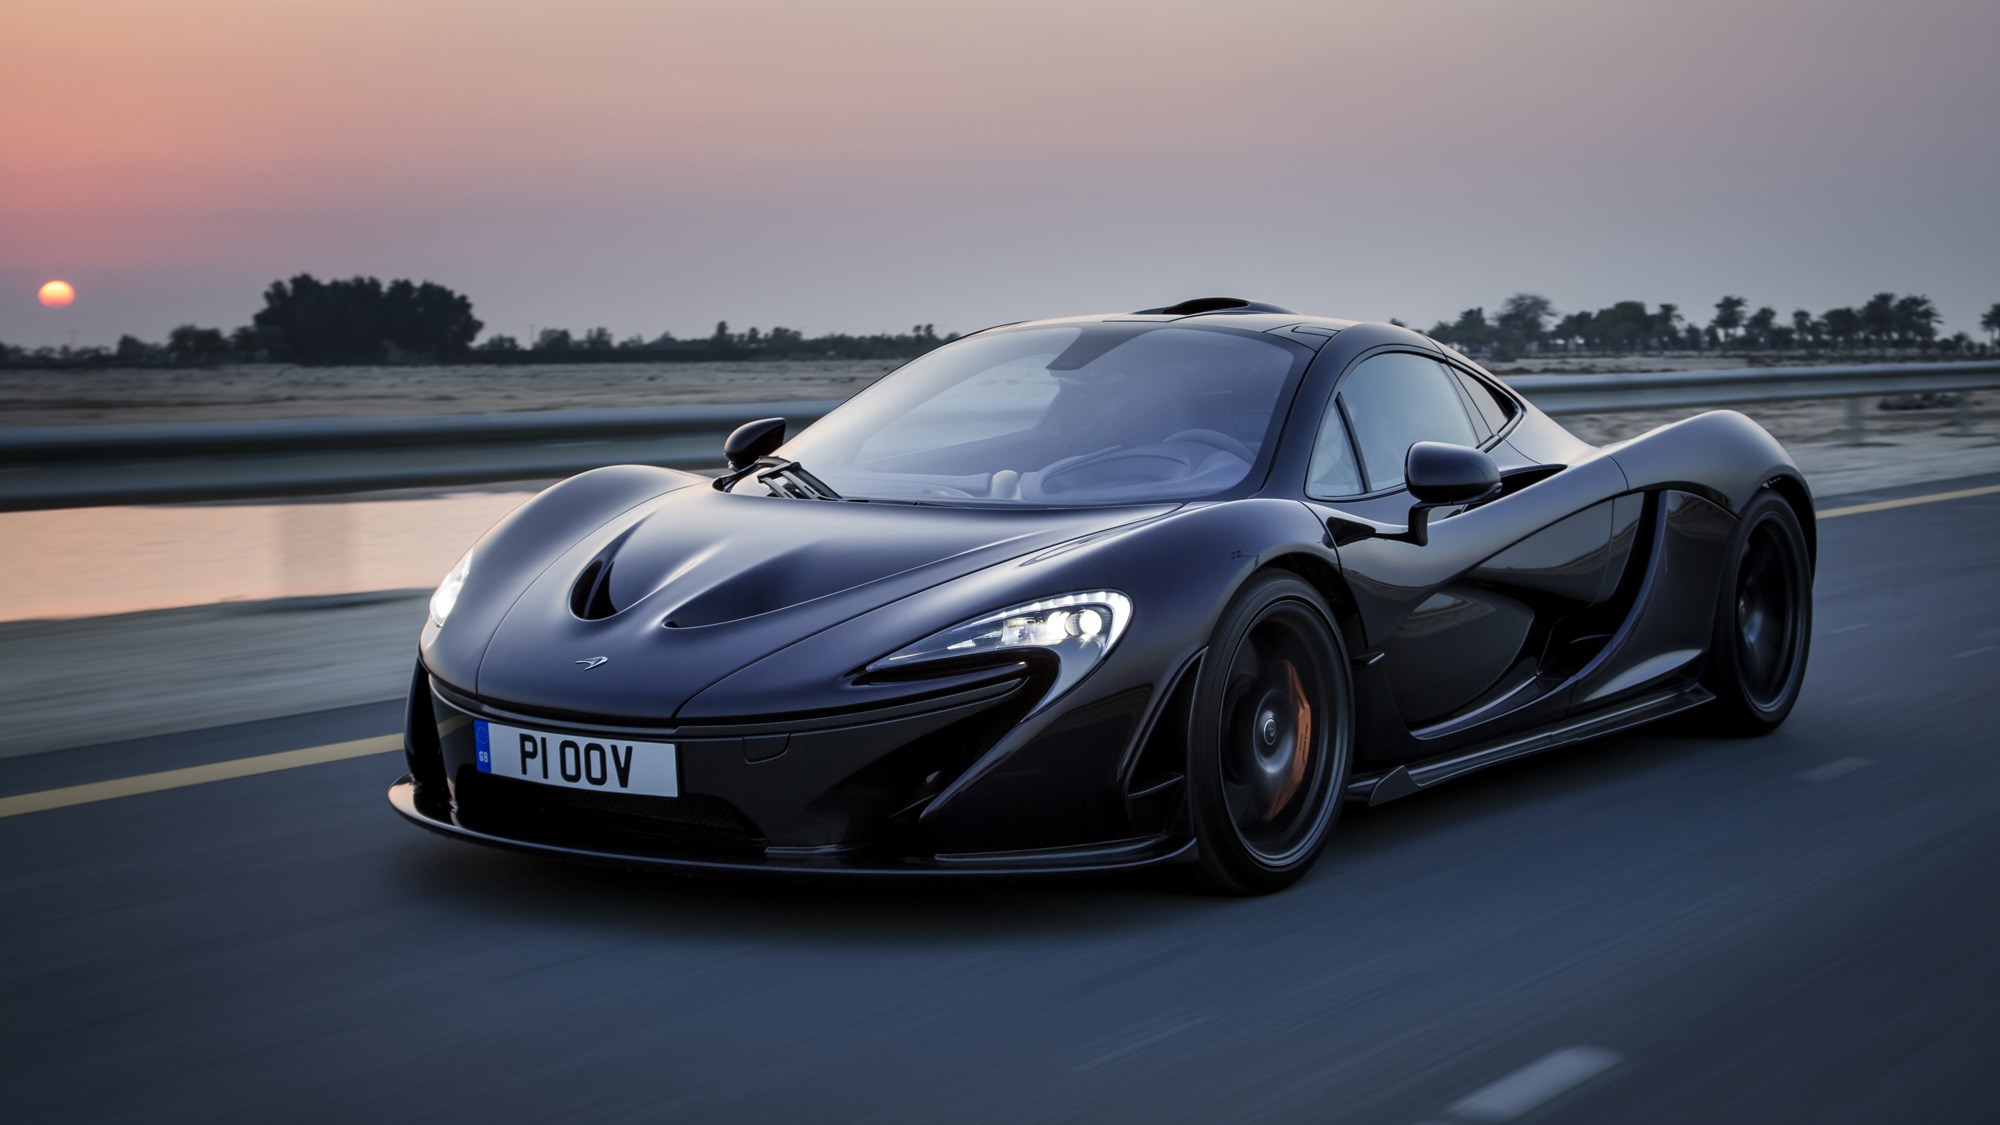 McLaren P1 review, Bahrain, black, front view, driving on the road